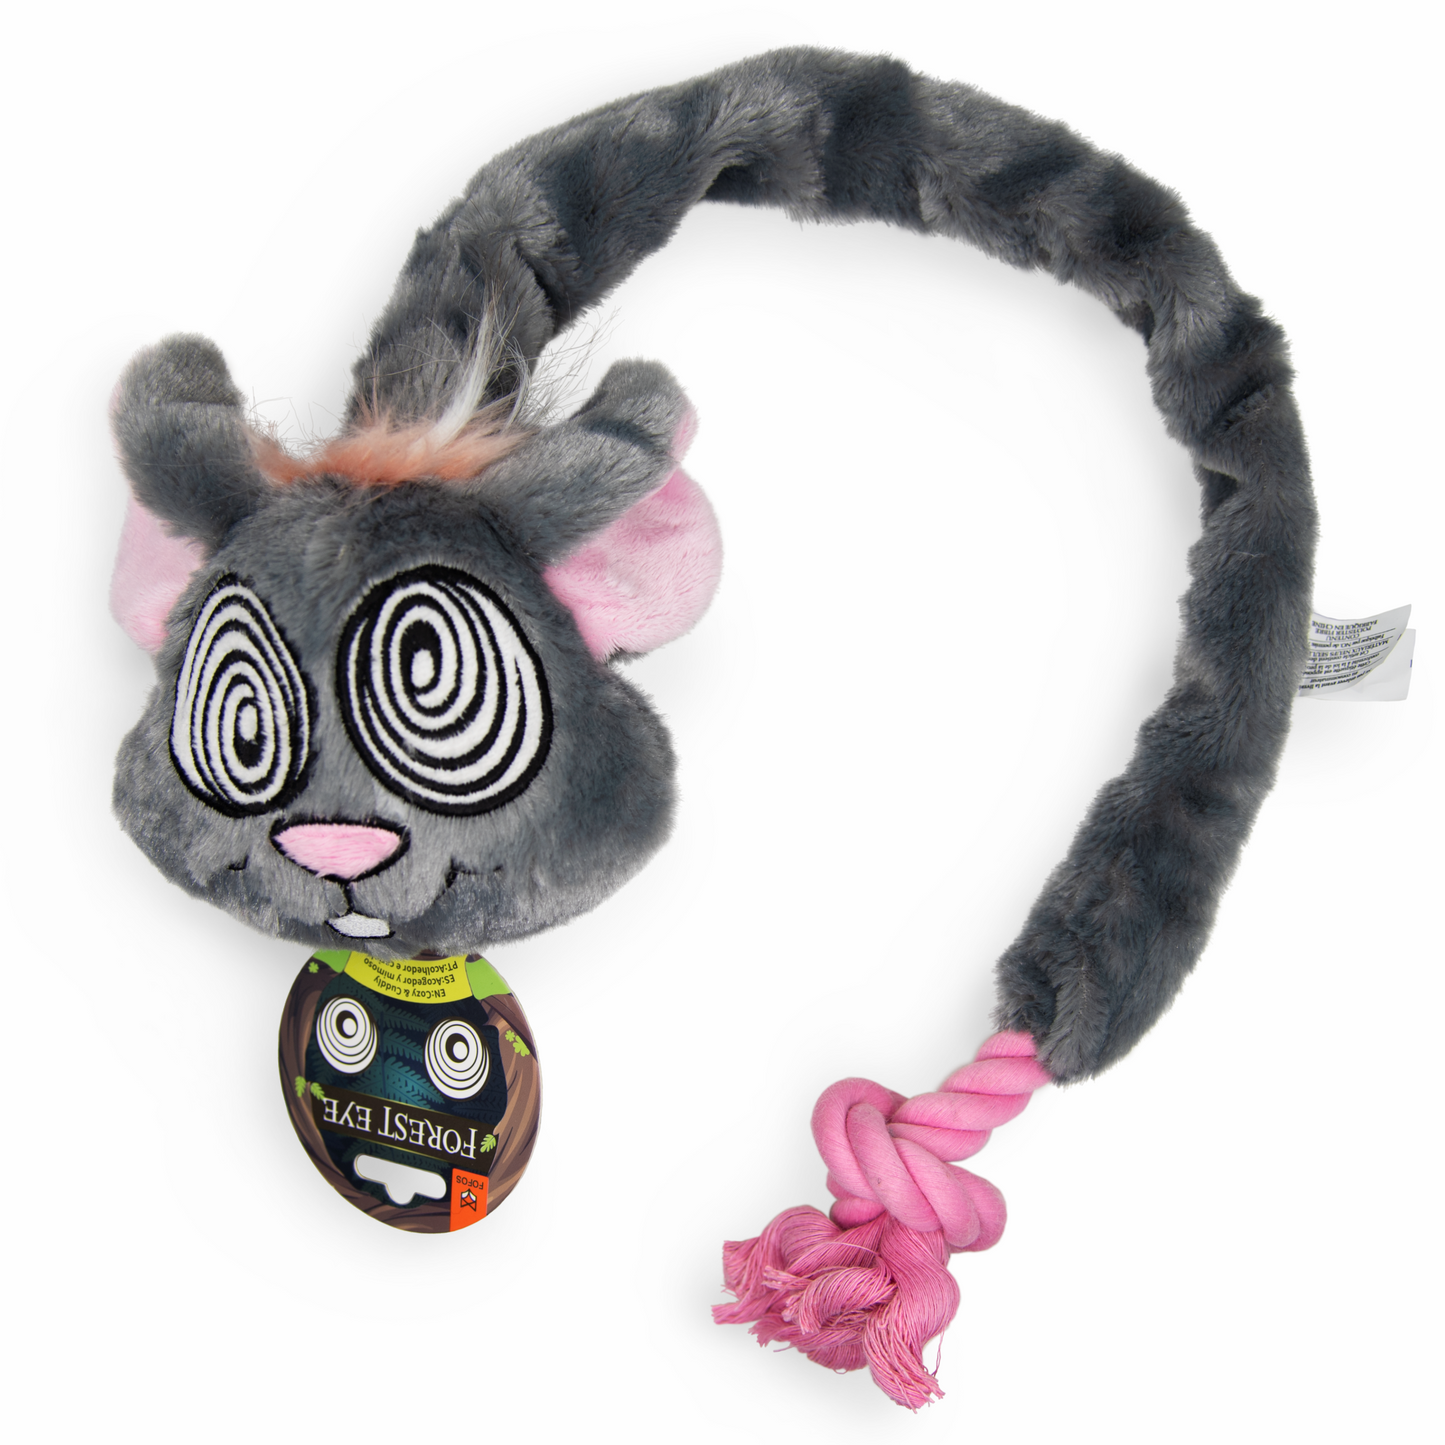 Fofos Forest Eye Mouse Rope